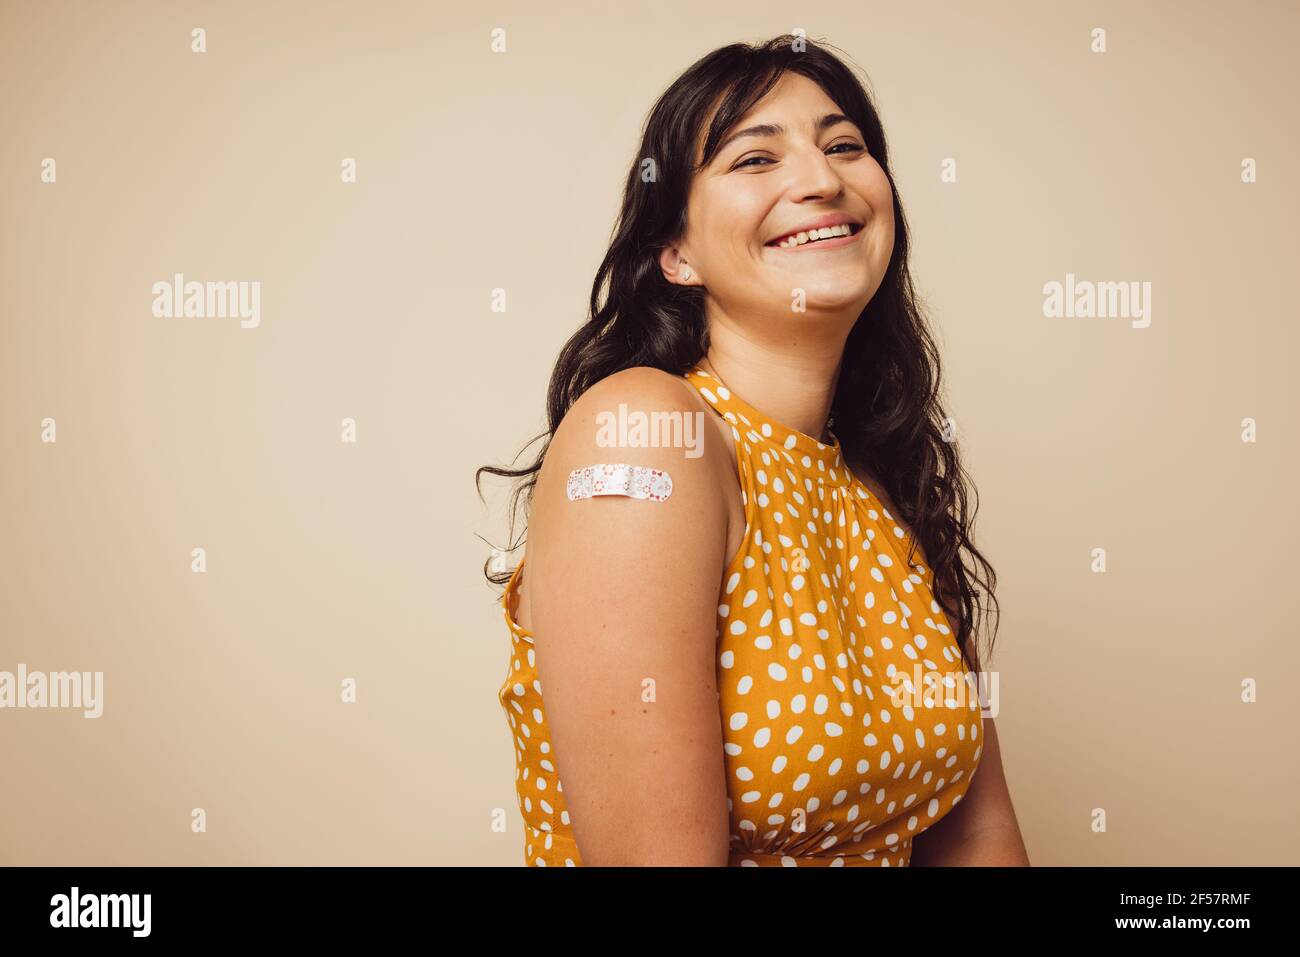 Beautiful mature with bandage on her arm after she received vaccination. Woman smiling on brown background feeling happy to get inoculated. Stock Photo